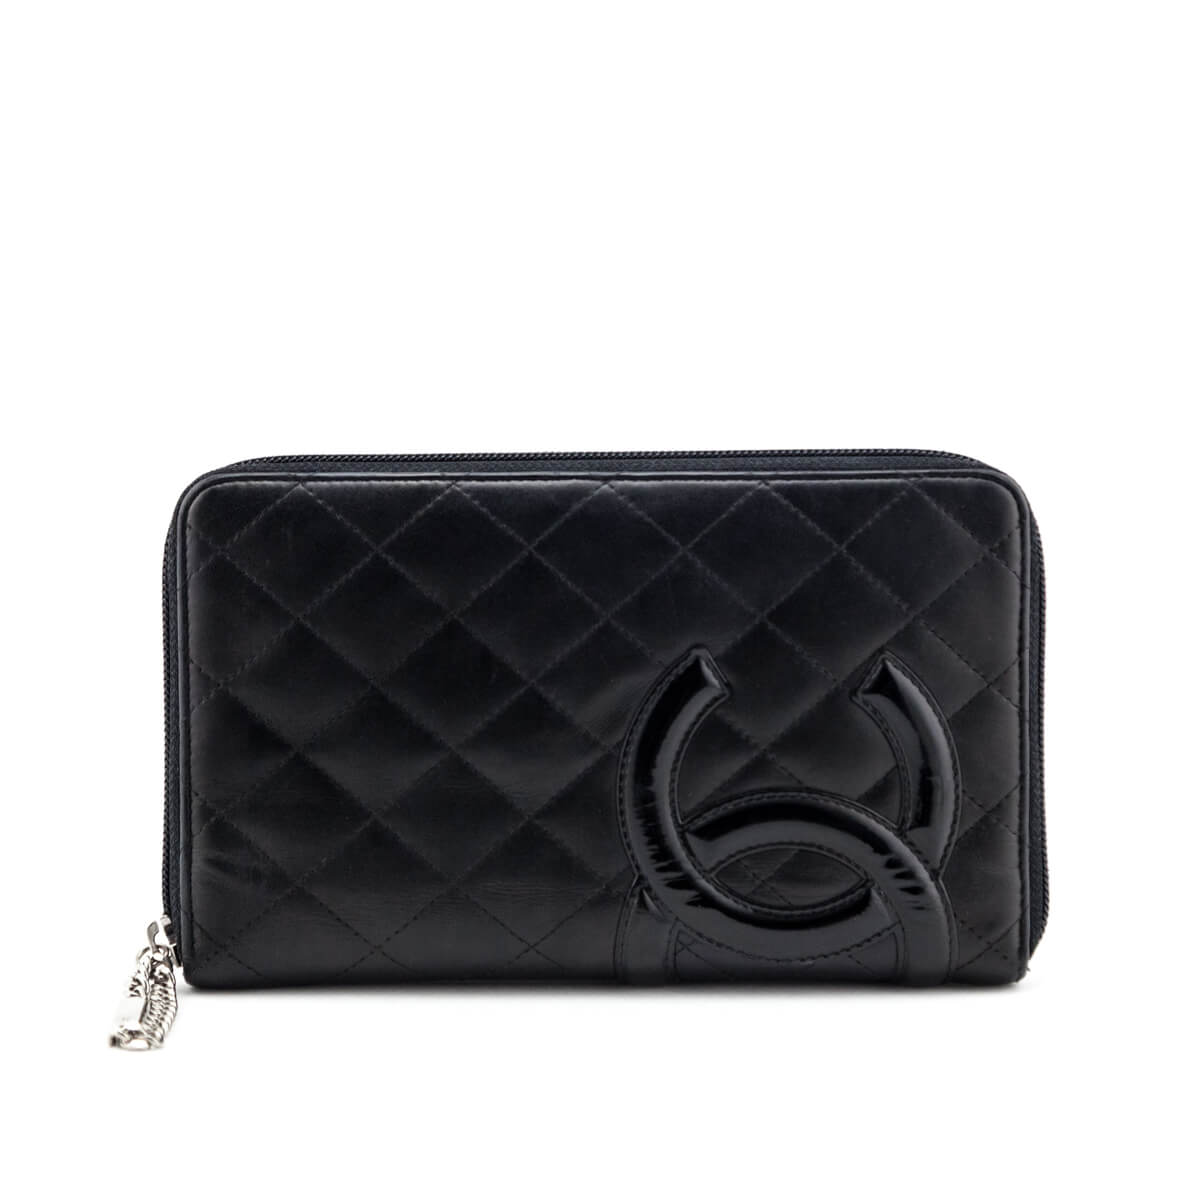 Chanel Black Quilted Leather Cambon Line Zippy Organizer Wallet 862616